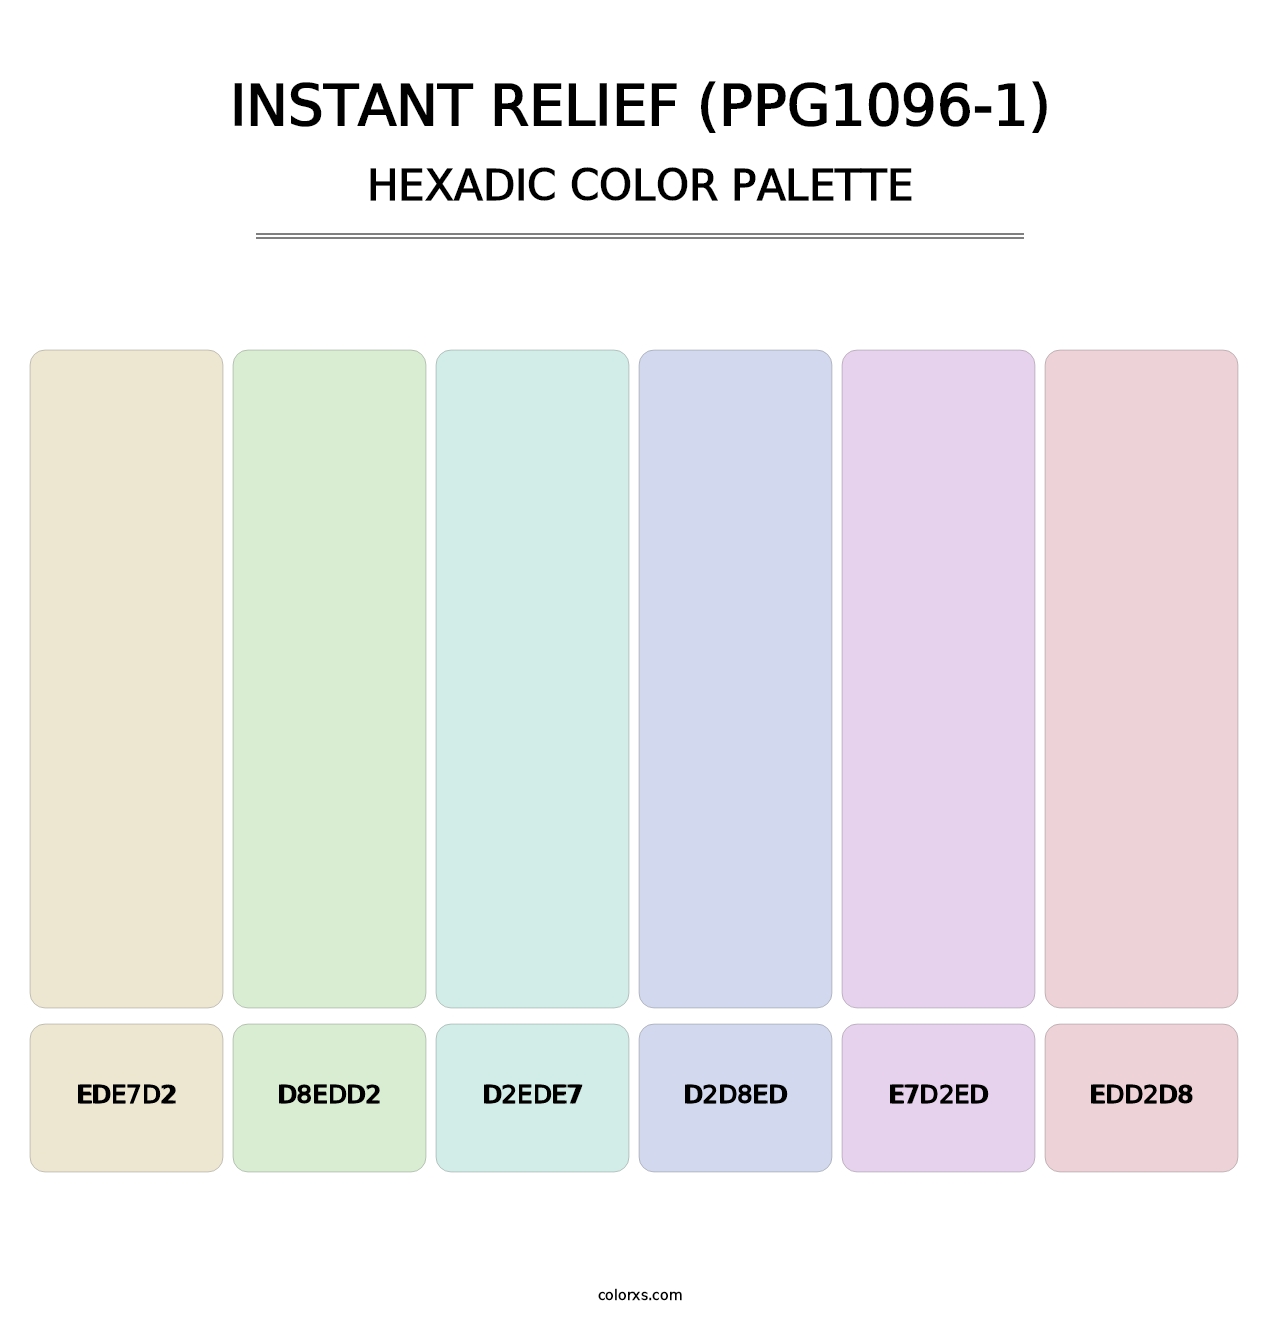 Instant Relief (PPG1096-1) - Hexadic Color Palette